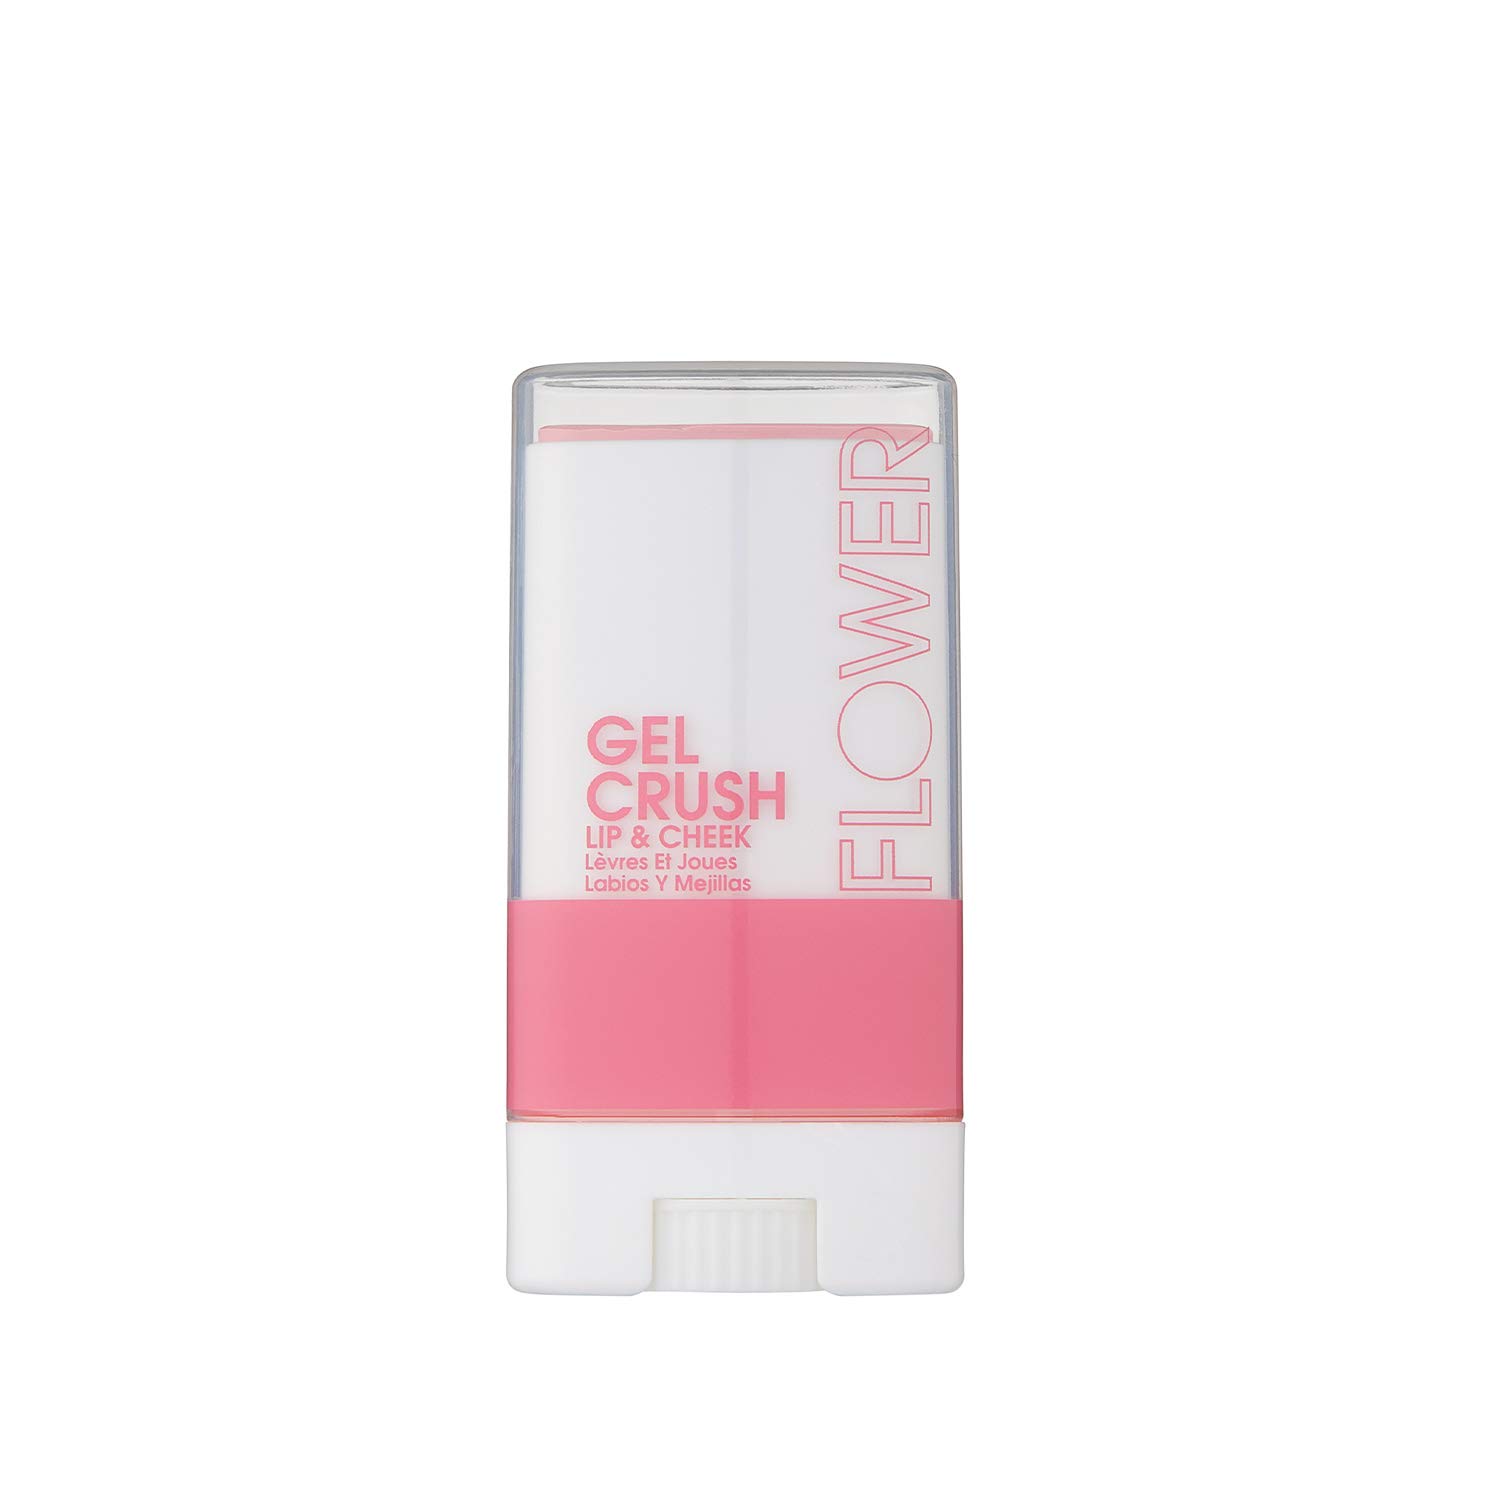 FLOWER BEAUTY Lip & Cheek Gel Crush | Cream Blush and Lips Tint in One Portable Multistick | Hydrating Burst of Color | (Strawberry)